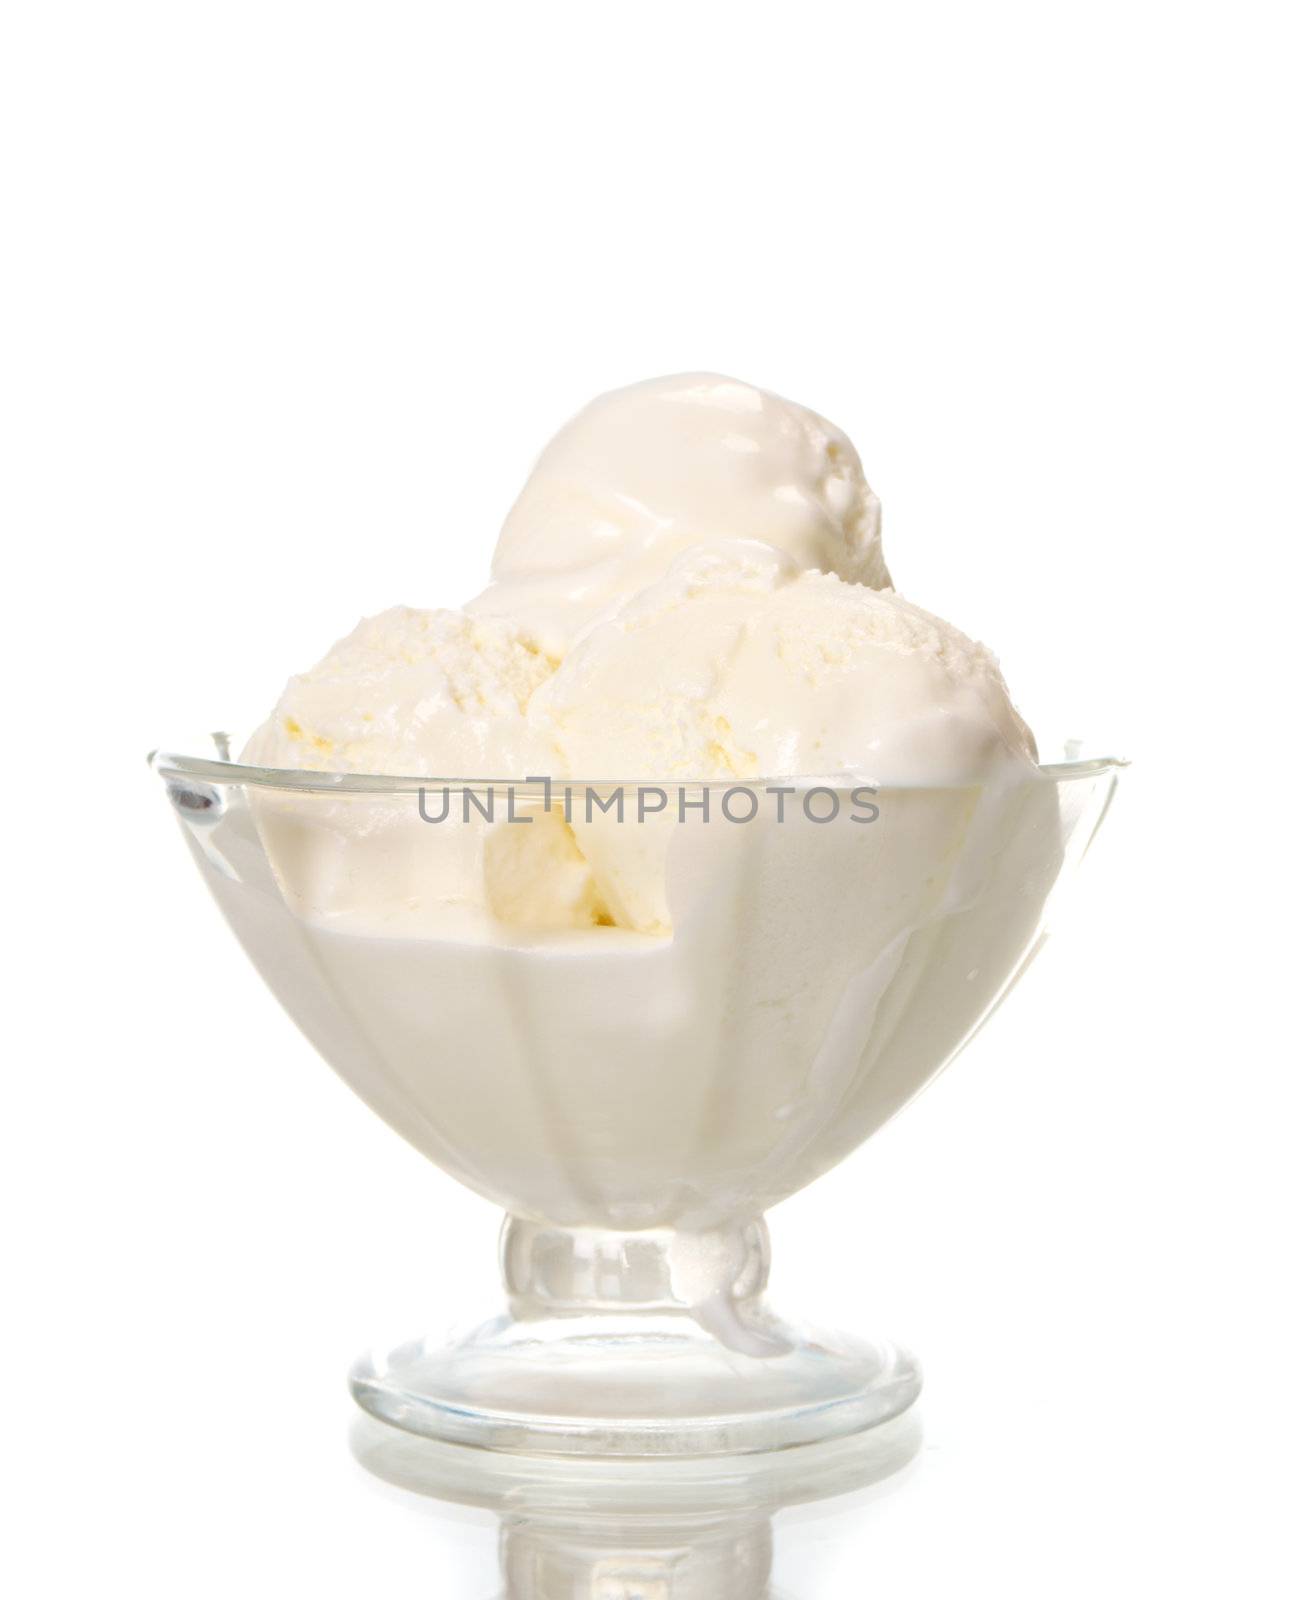 ice cream in a glass vase. closeup.isolated on white background.
